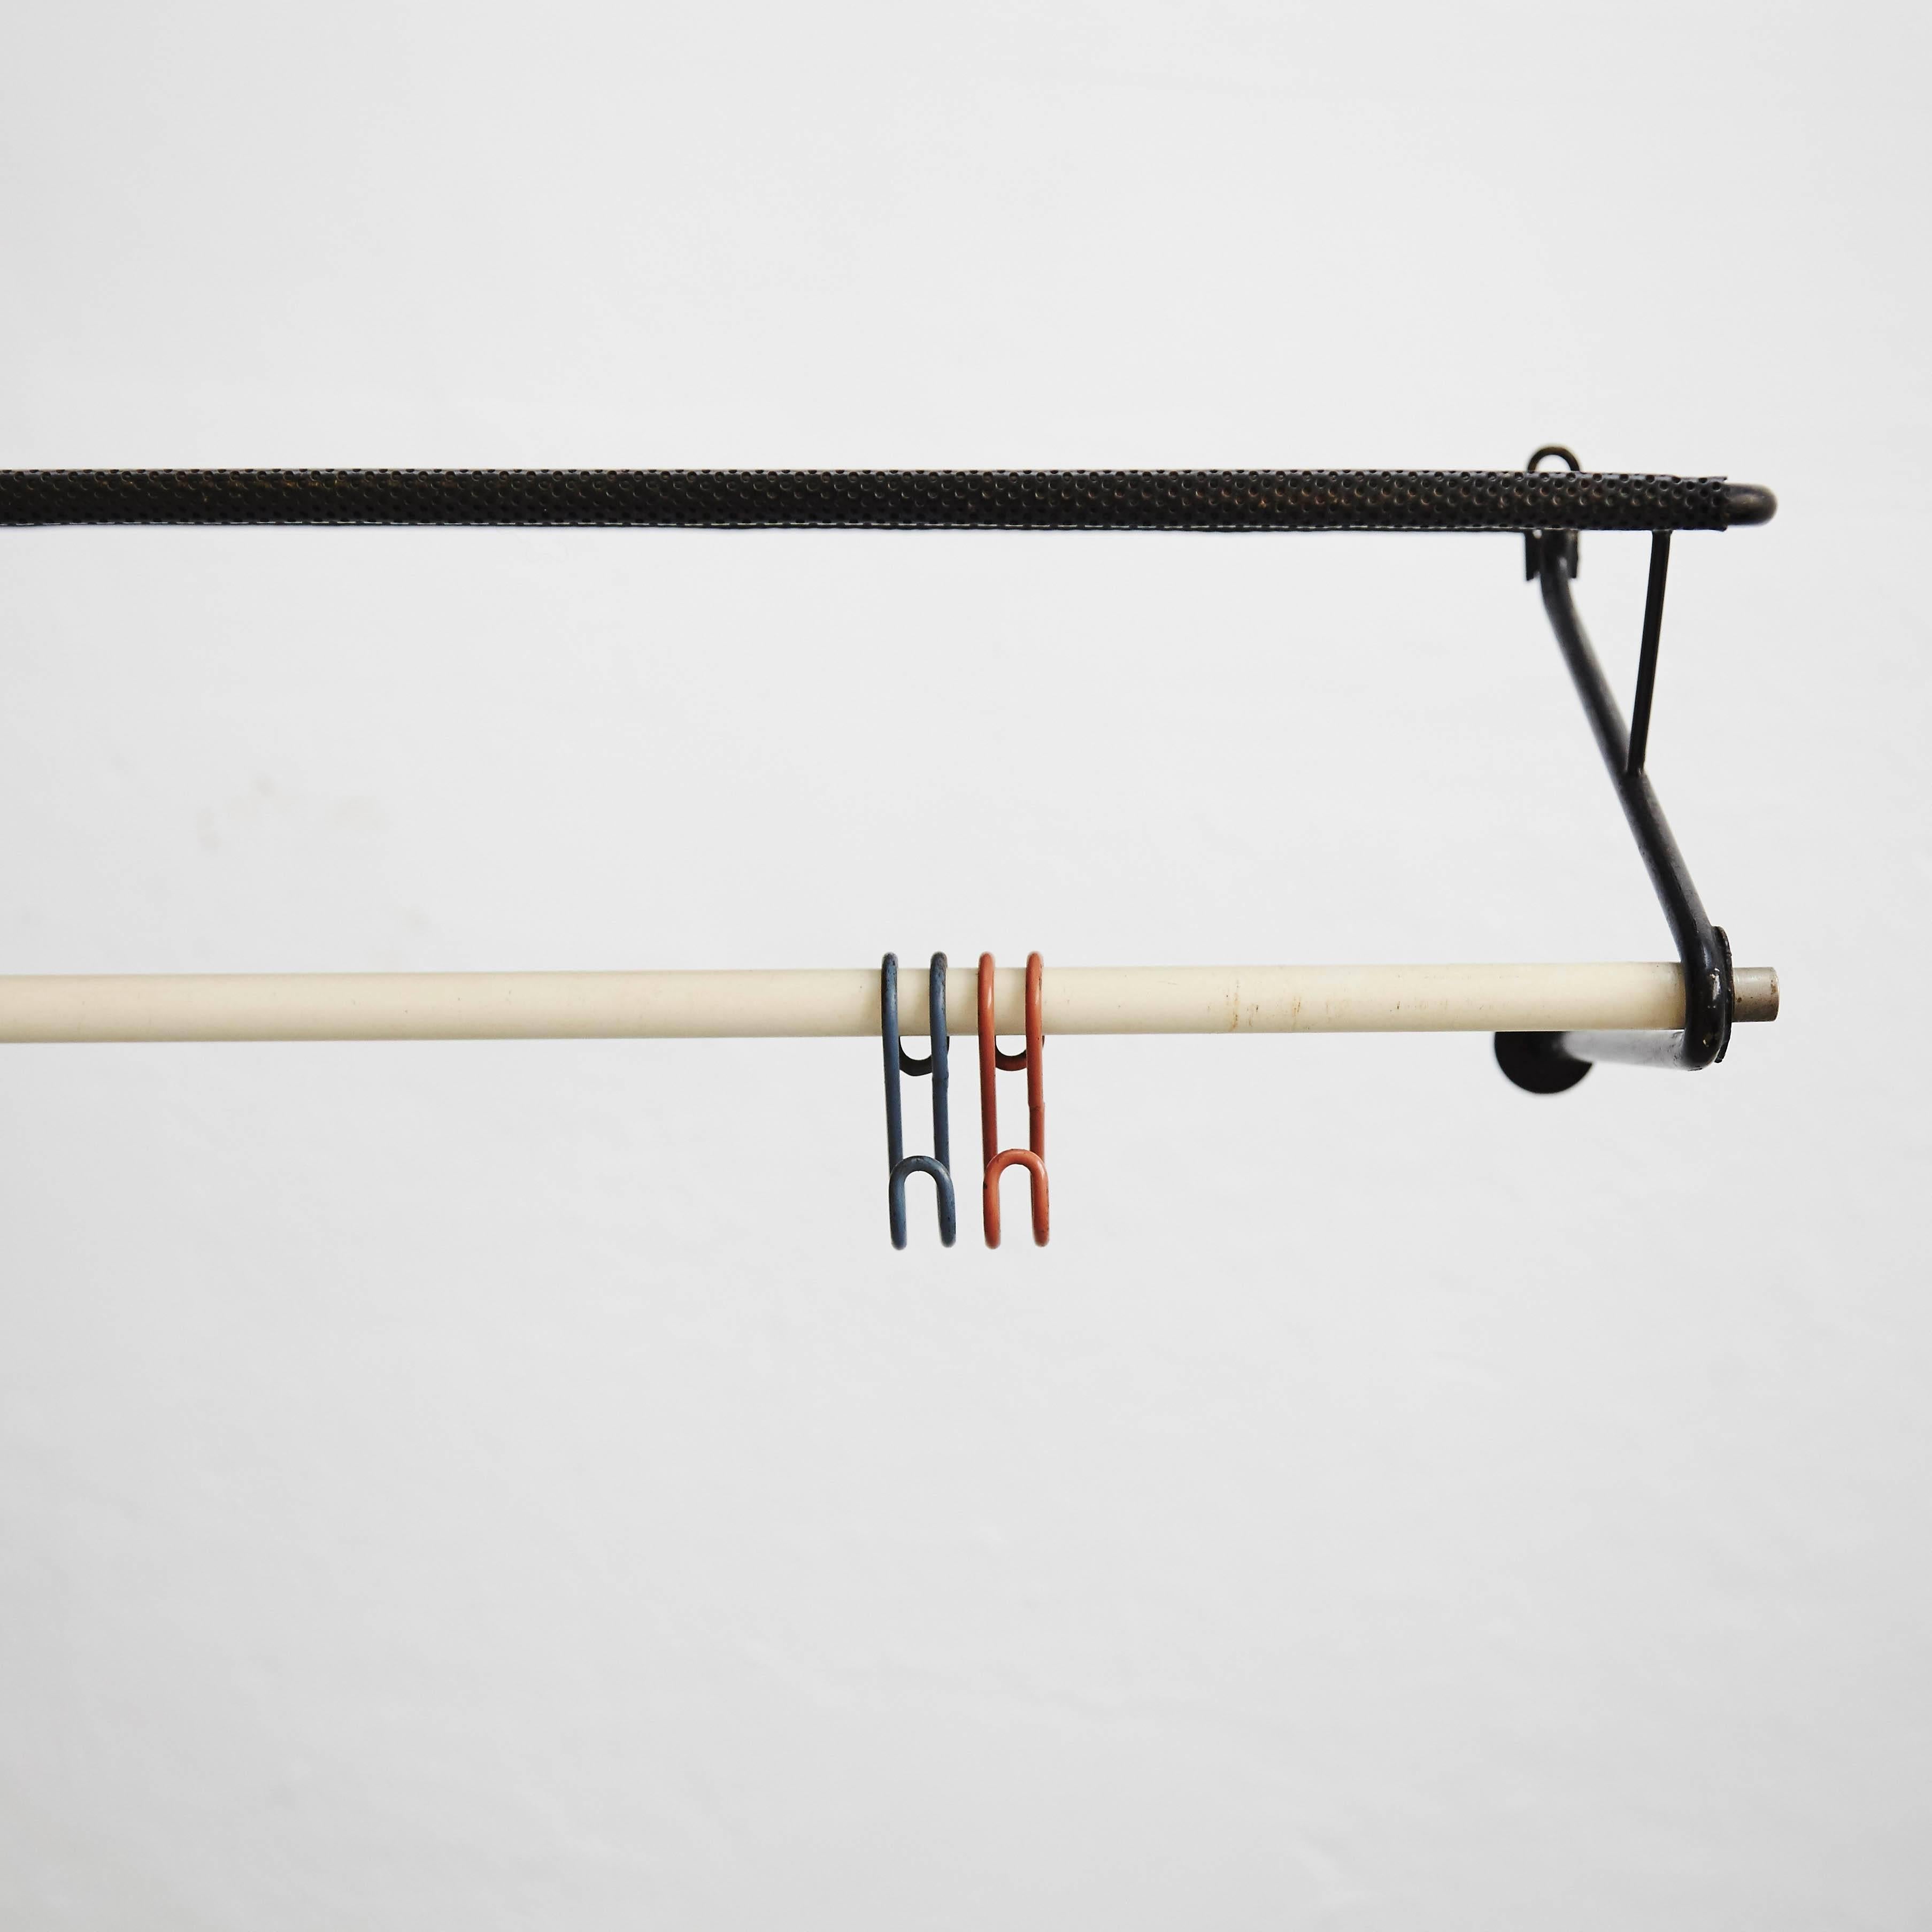 Coat rack designed by Mathieu Matégot.
Manufactured by Artimeta (Netherland), circa 1950.
Perforated and lacquered metal.

In good original condition, with minor wear consistent with age and use, preserving a beautiful patina.

Mathieu